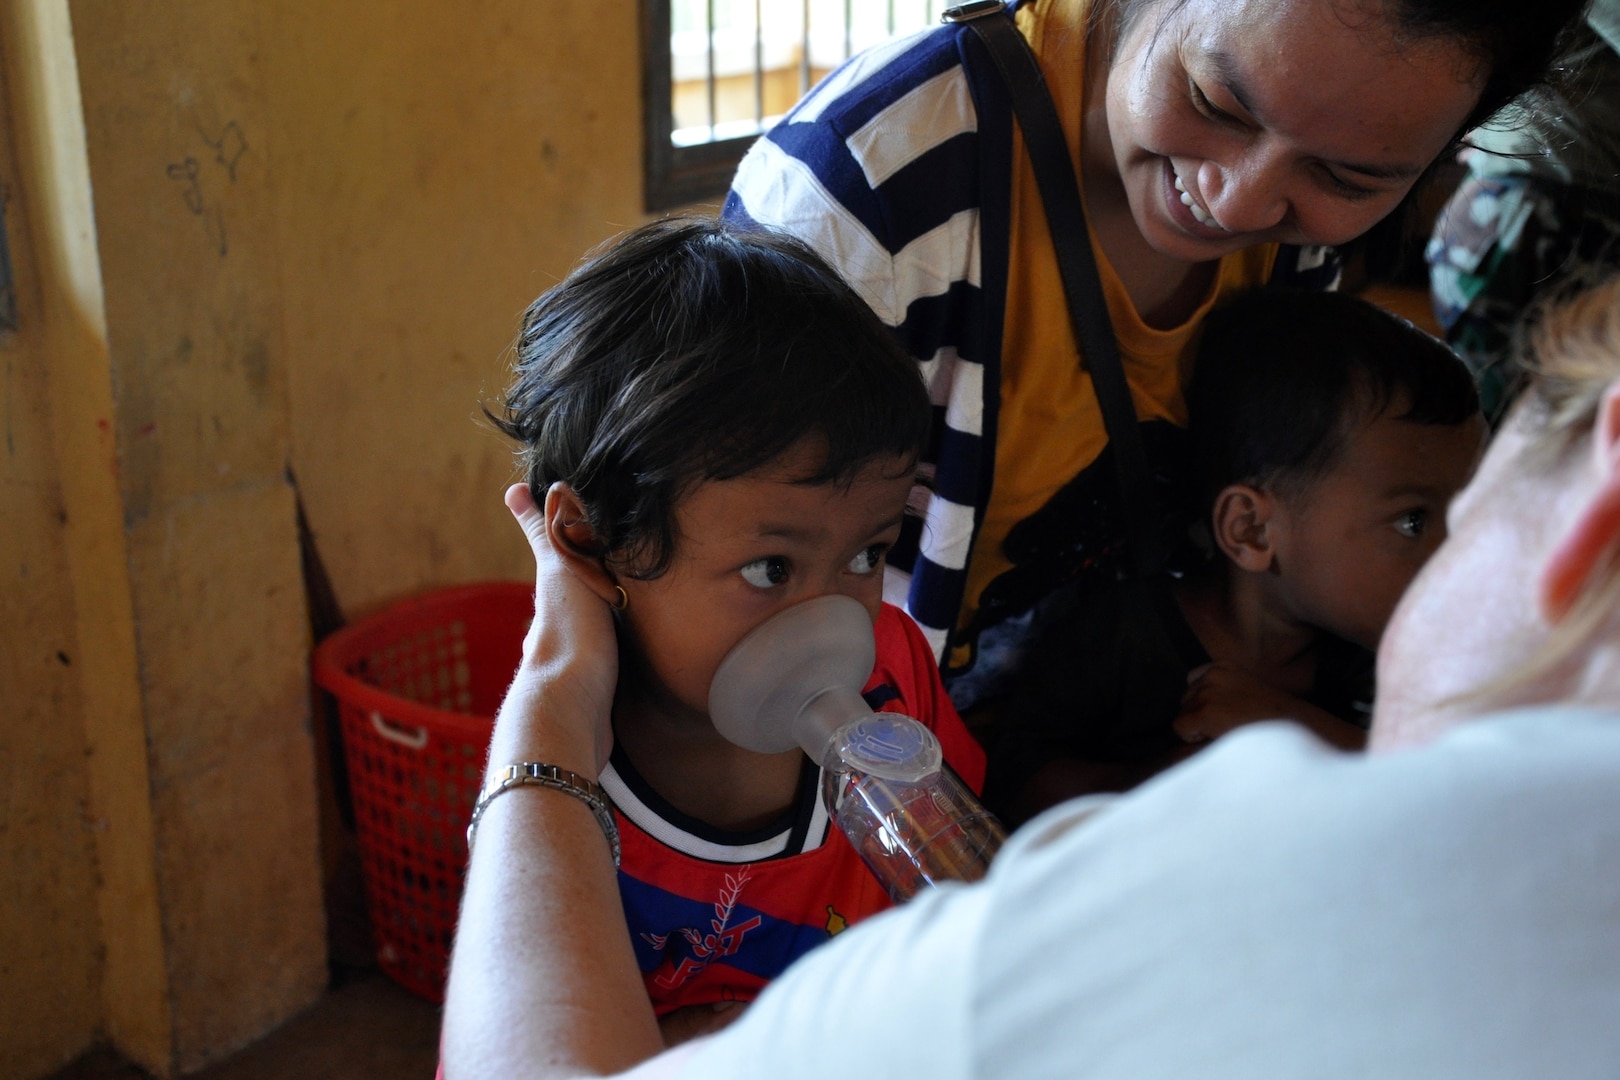 U.S. Air Force Capt. Tasha Hellu, a pediatric physician deployed from the 36th Medical Group, Anderson Air Force Base, Guam, teaches a young Cambodian girl to breath in medicine to treat asthma June 13, 2016, during Pacific Angel 16-2 in Kampot Province, Cambodia. The health services outreach team set up a mobile clinic at two different sites throughout the week, Por Thivong Primary School in Tuek Chhou district June 13-15, and at the Ang Chum Trapaing Chhuk Secondary School in Kampong Trach district June 16-18. The clinics included general health, optometry, dental, family medicine and physical therapy services, as well as a small pharmacy. (U.S. Air Force photo by Capt. Susan Harrington/Released)